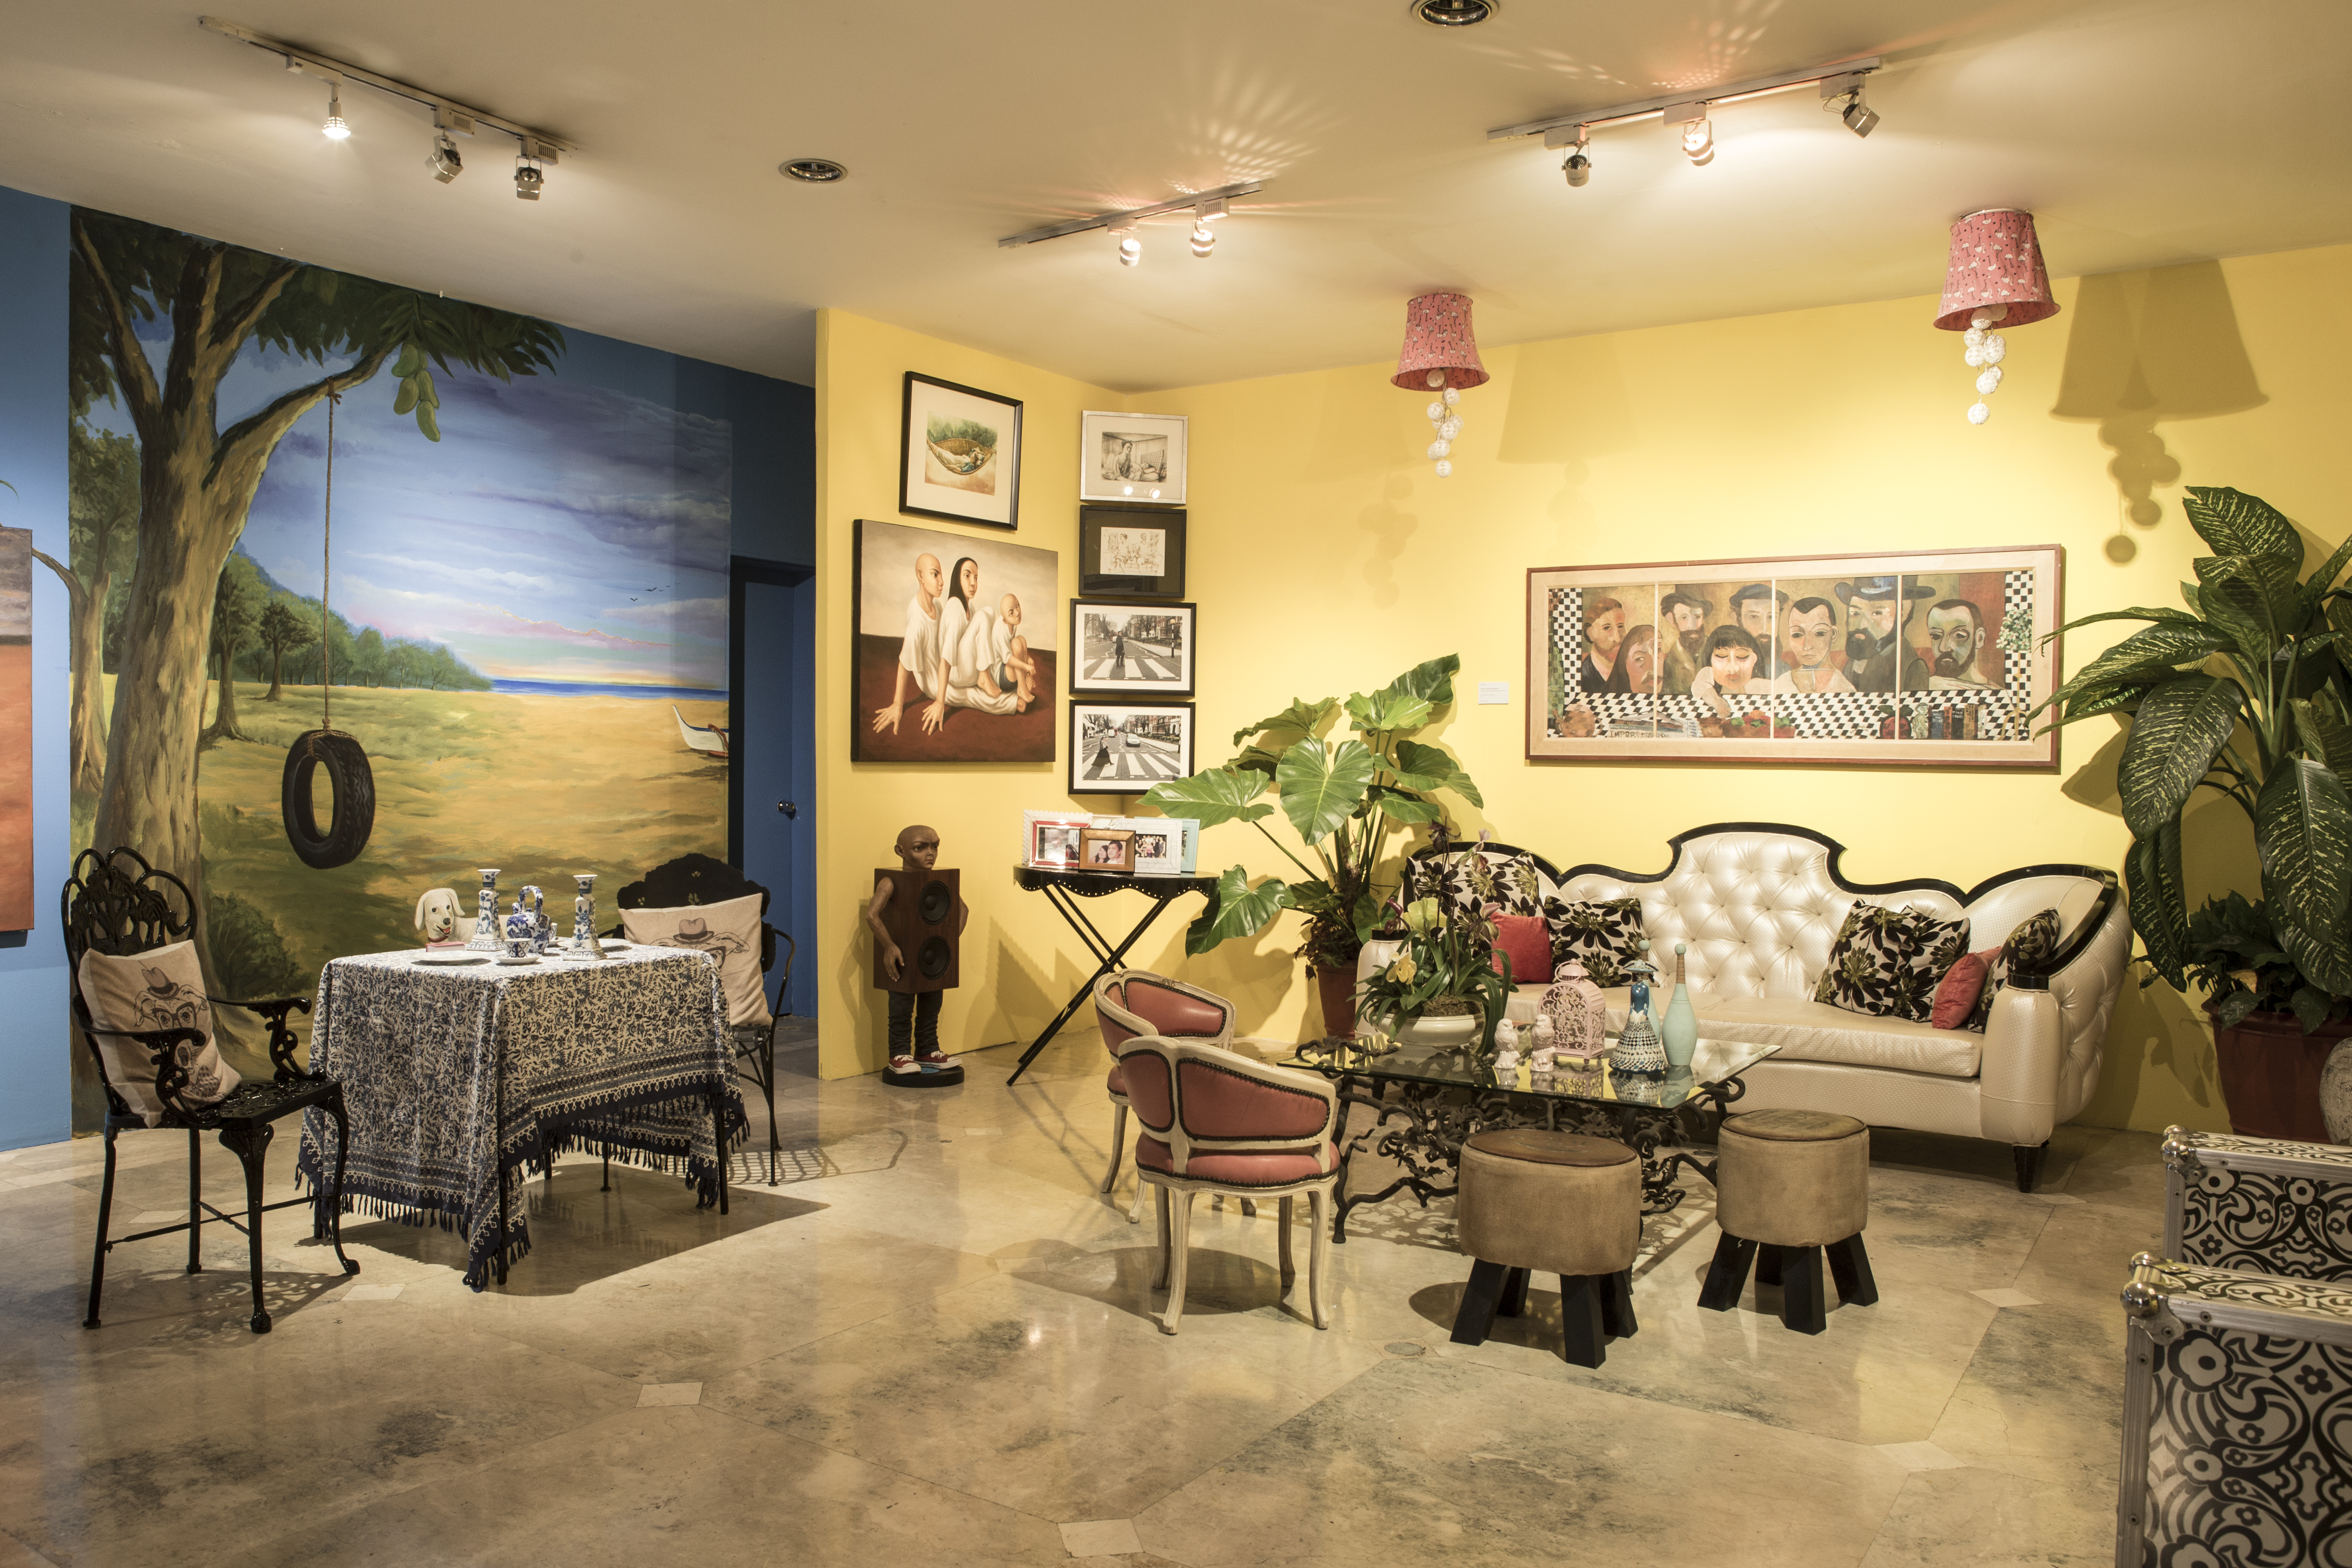 The living room of Elmer Borlongan and Plet Bolipata is recreated by the main entrance of the museum using furniture and decor from their residence